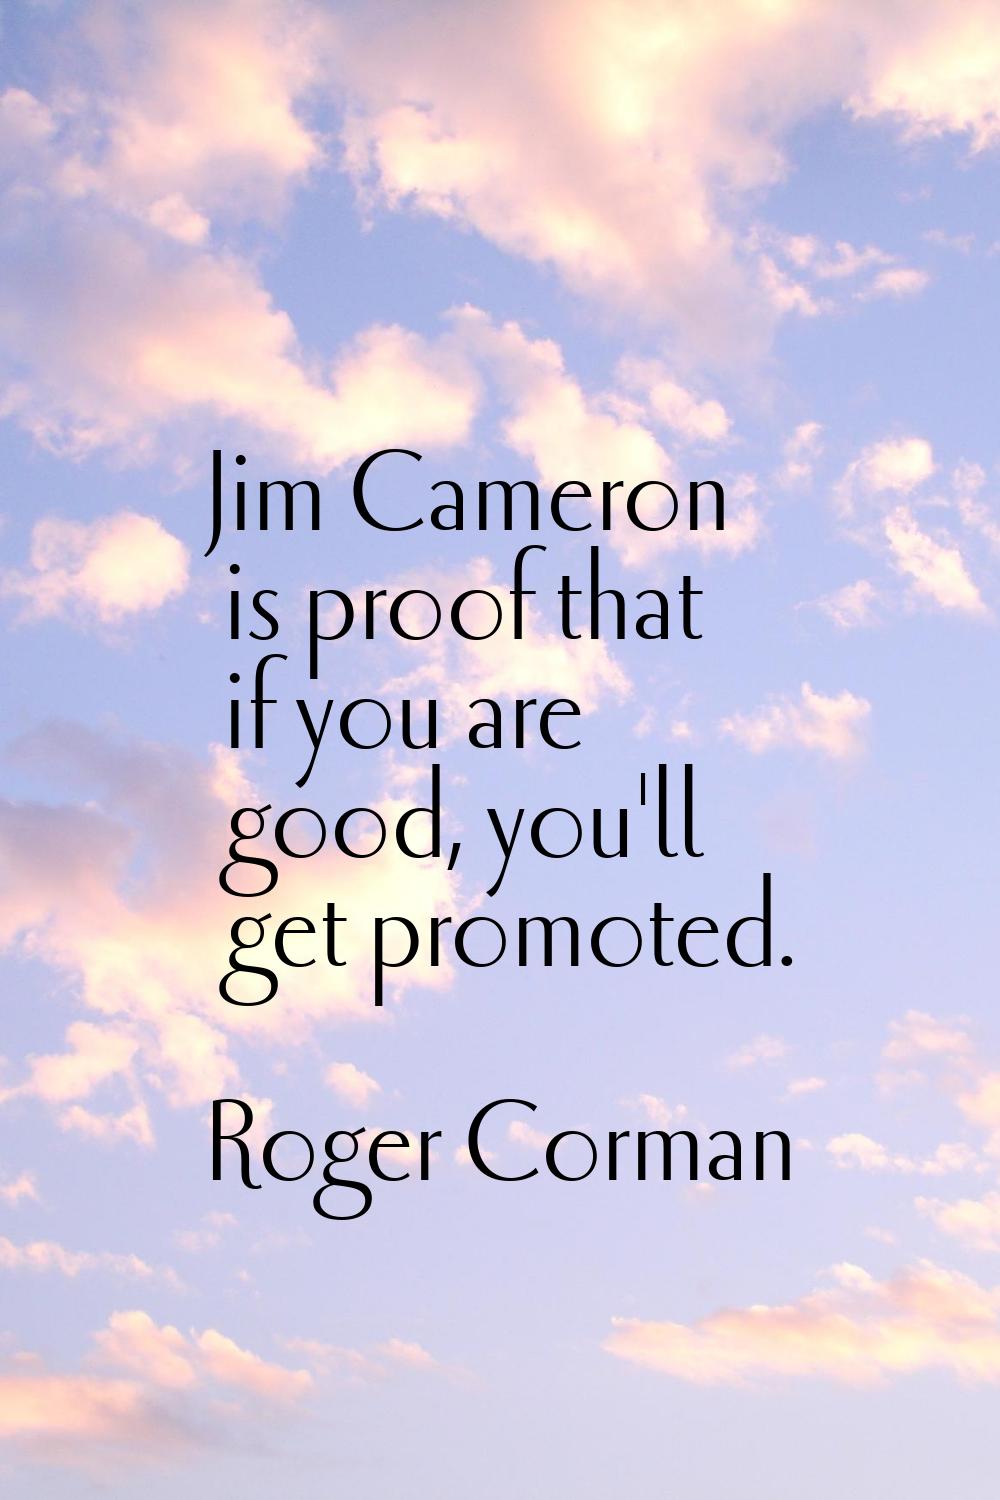 Jim Cameron is proof that if you are good, you'll get promoted.